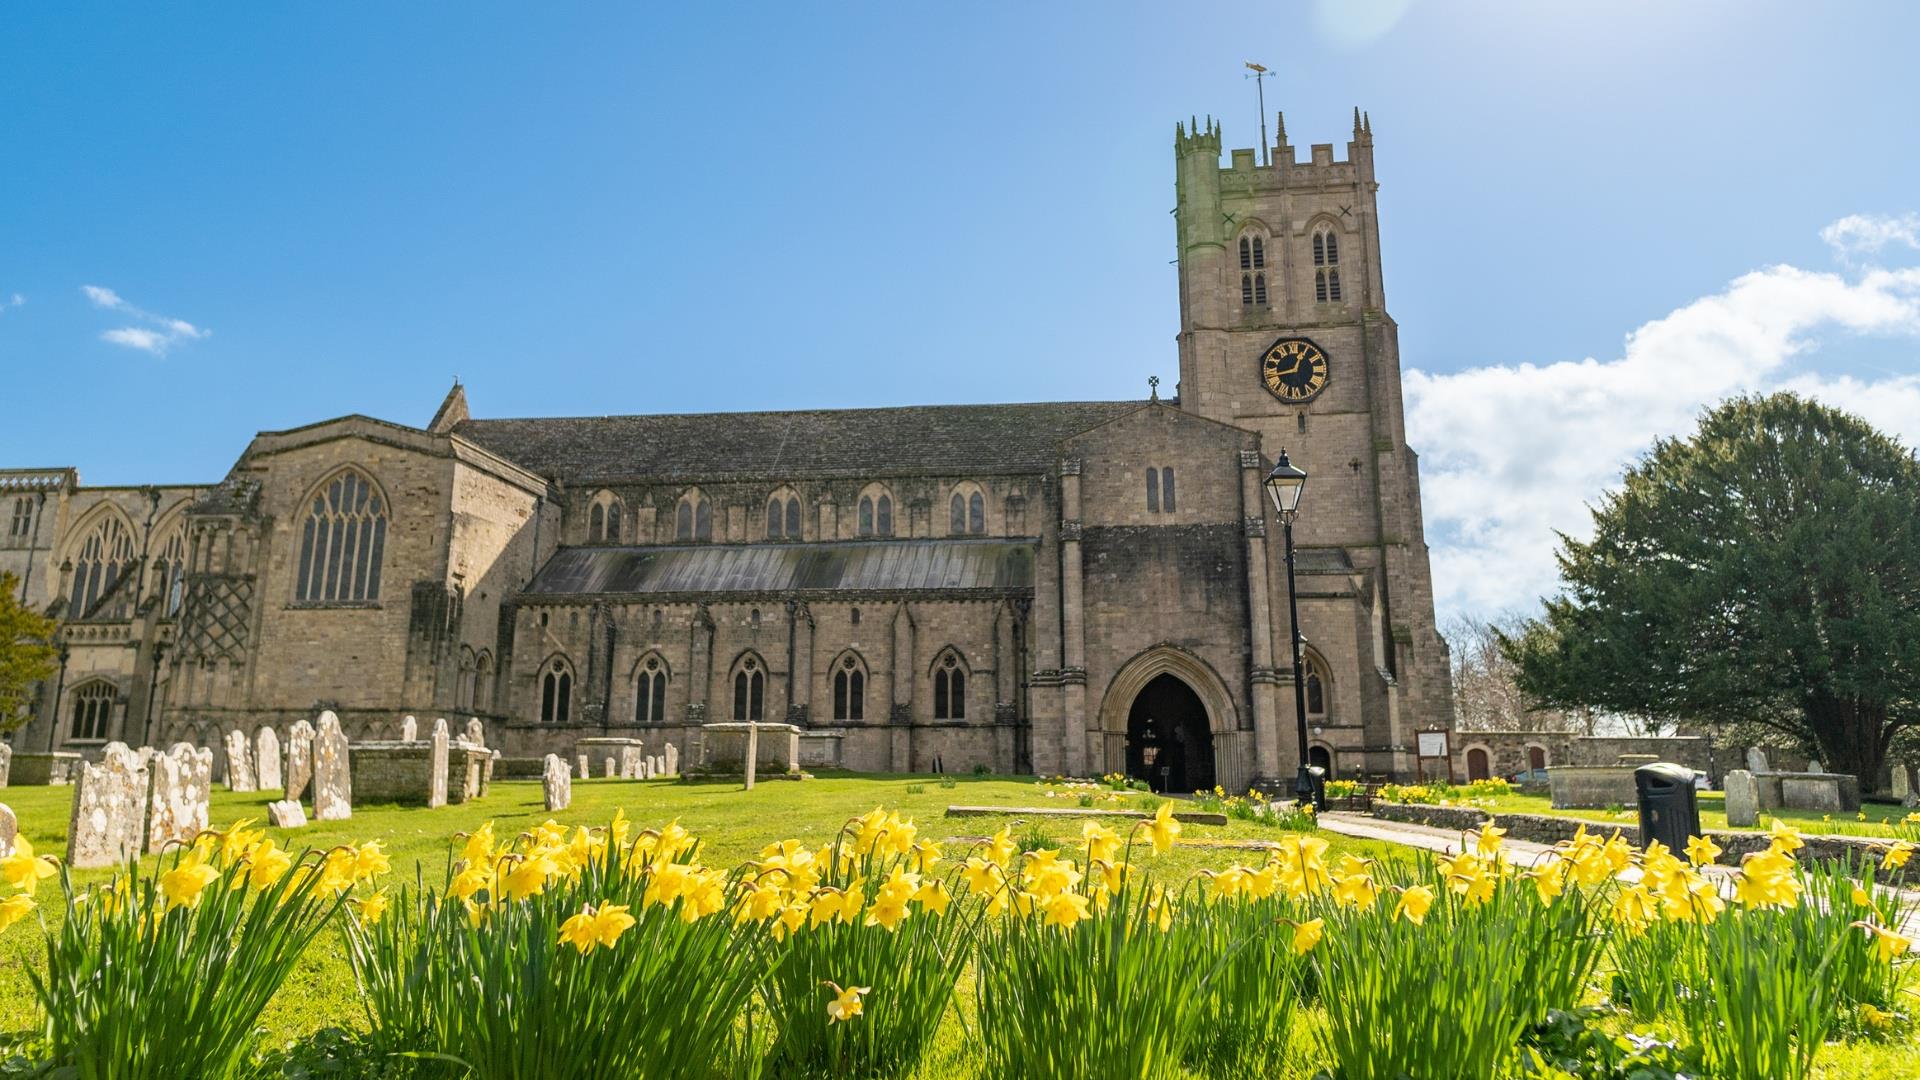 Yellow flowers blooming around the Priory on a crisp spring day